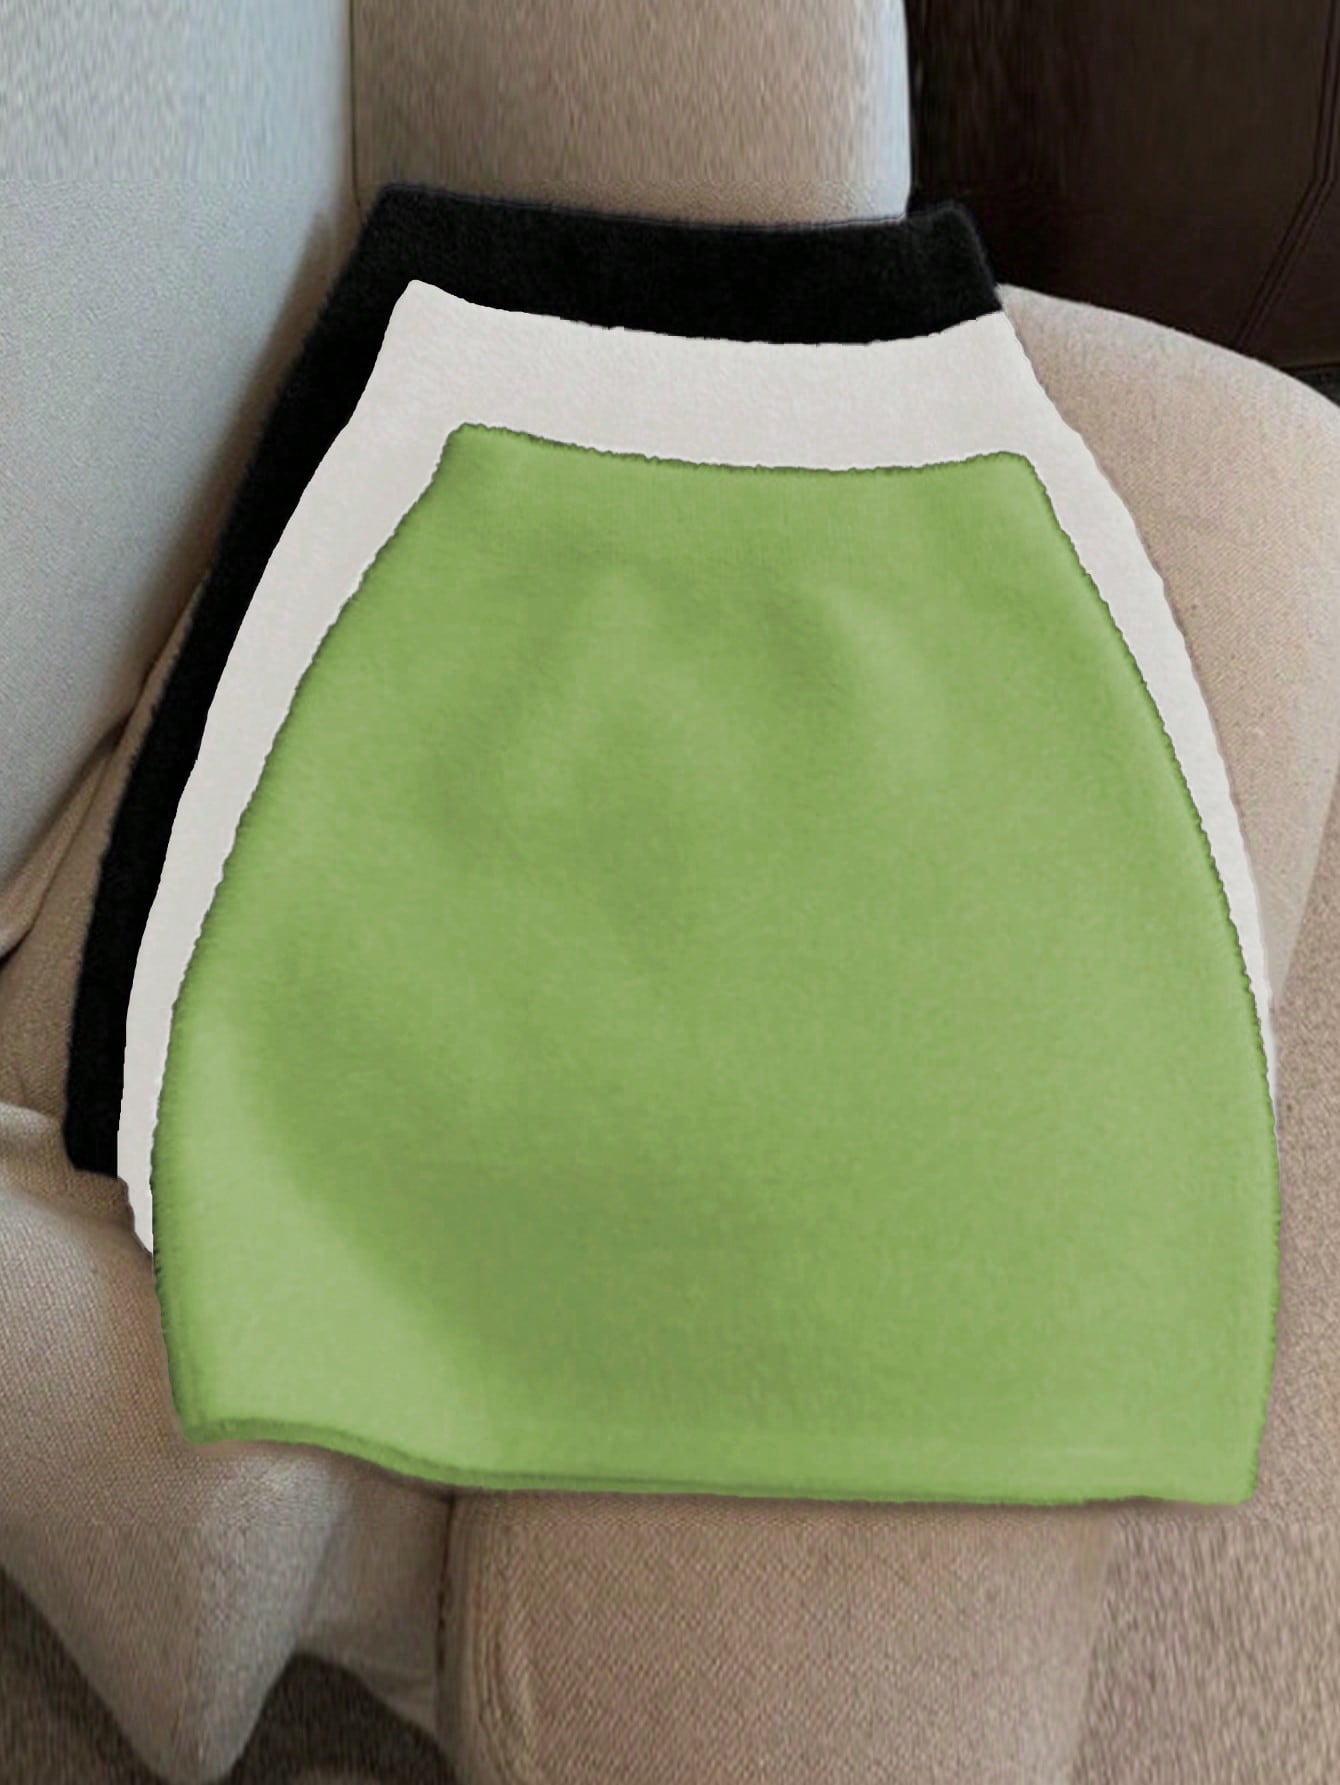 Plus Size Solid Color Sweater Skirt